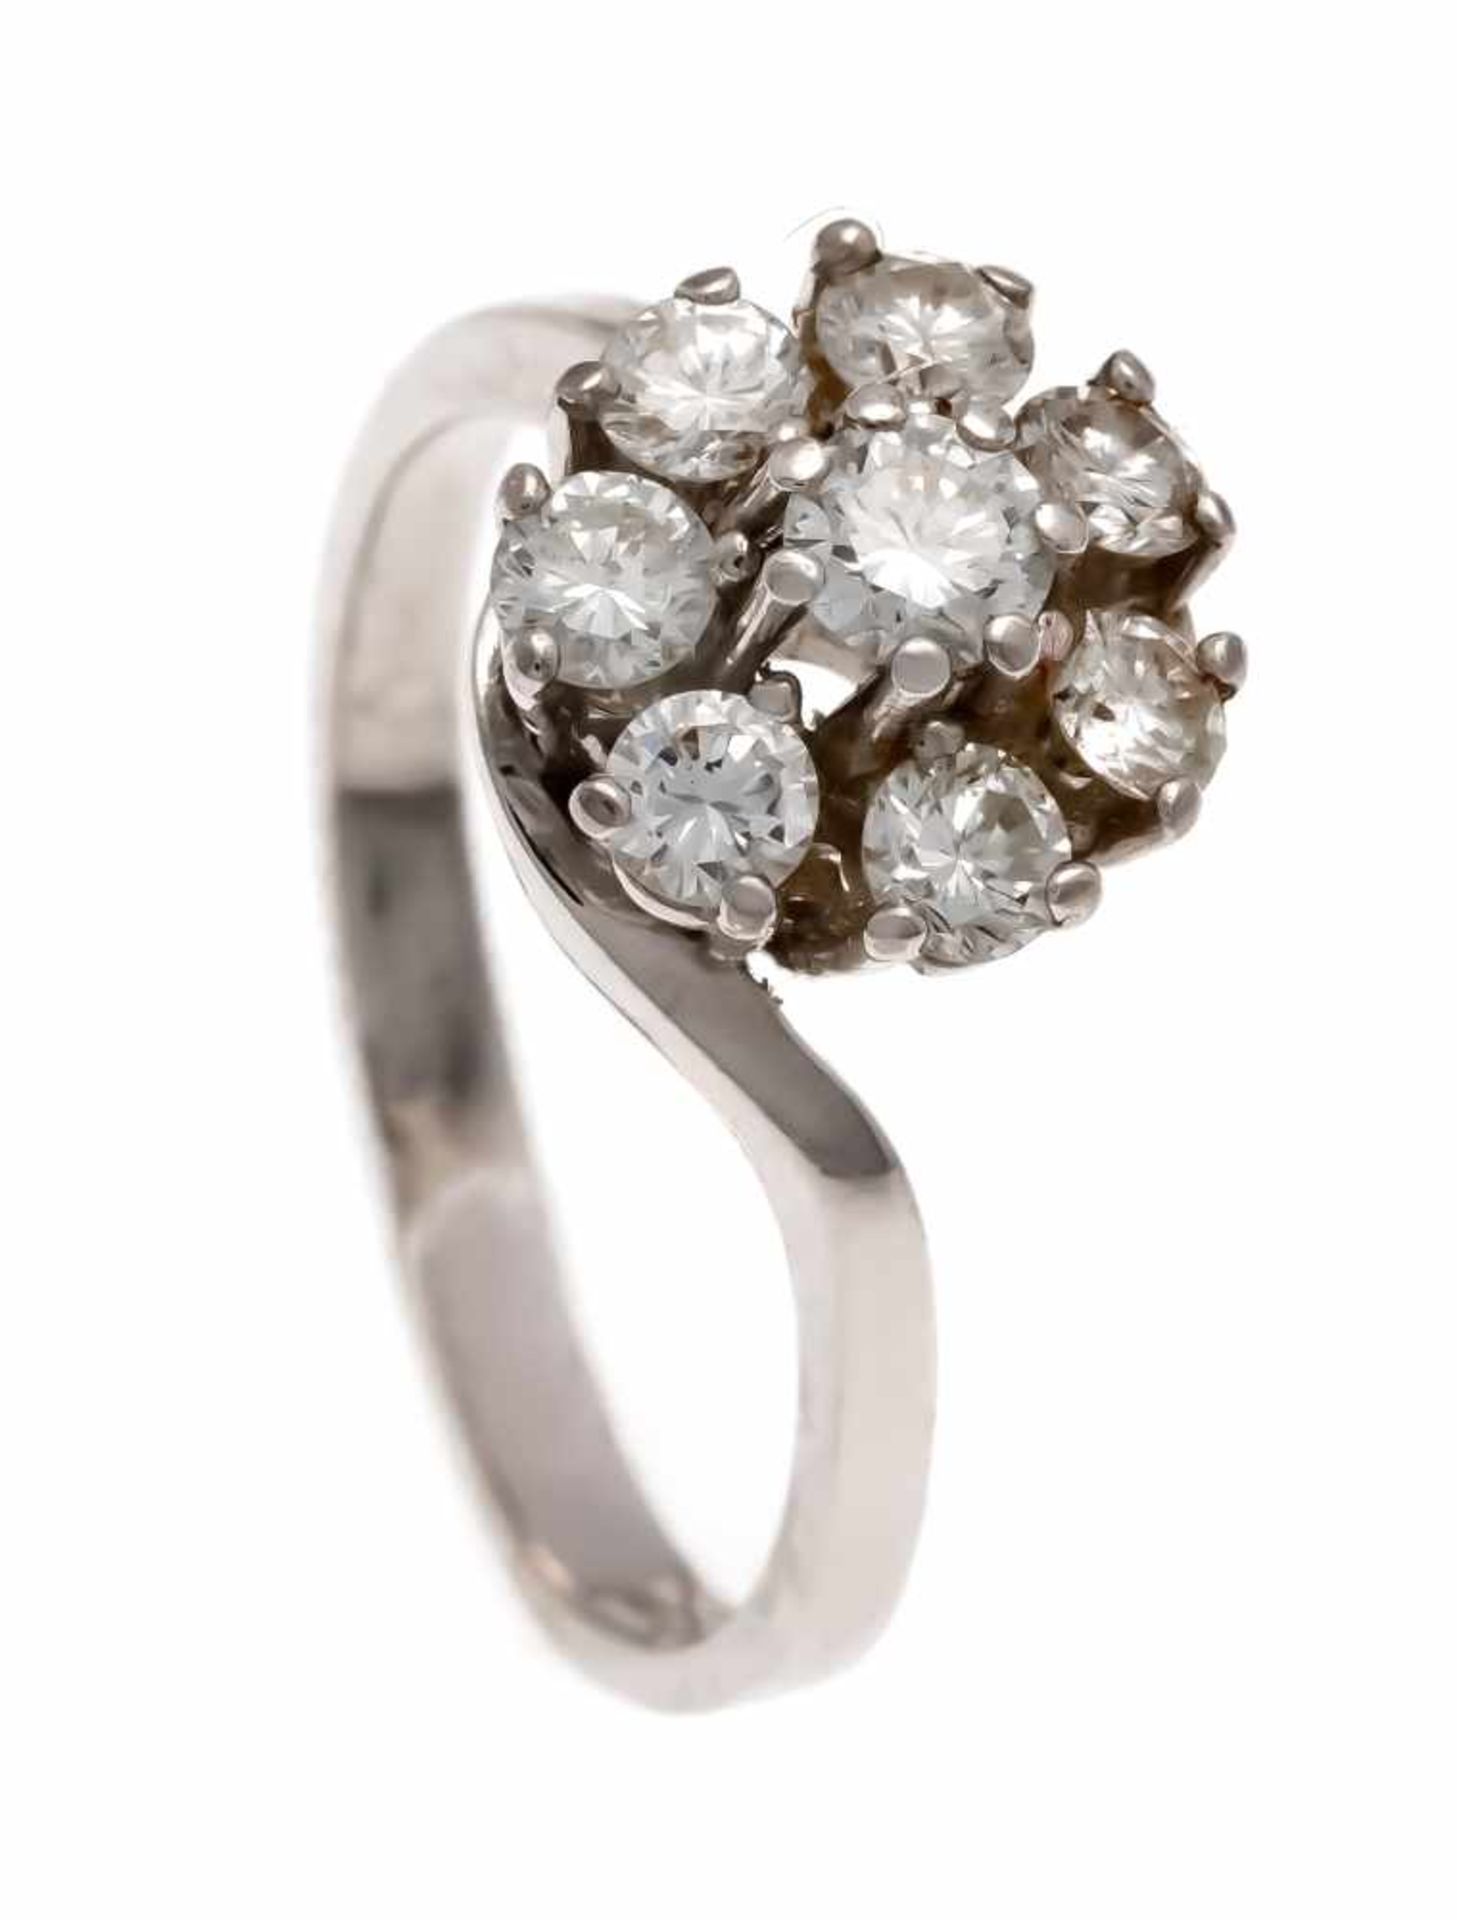 Brilliant ring WG 585/000 with 8 brilliants, total 1.03 ct W / VS, RG 55, 4.8 gBrillant-Ring WG